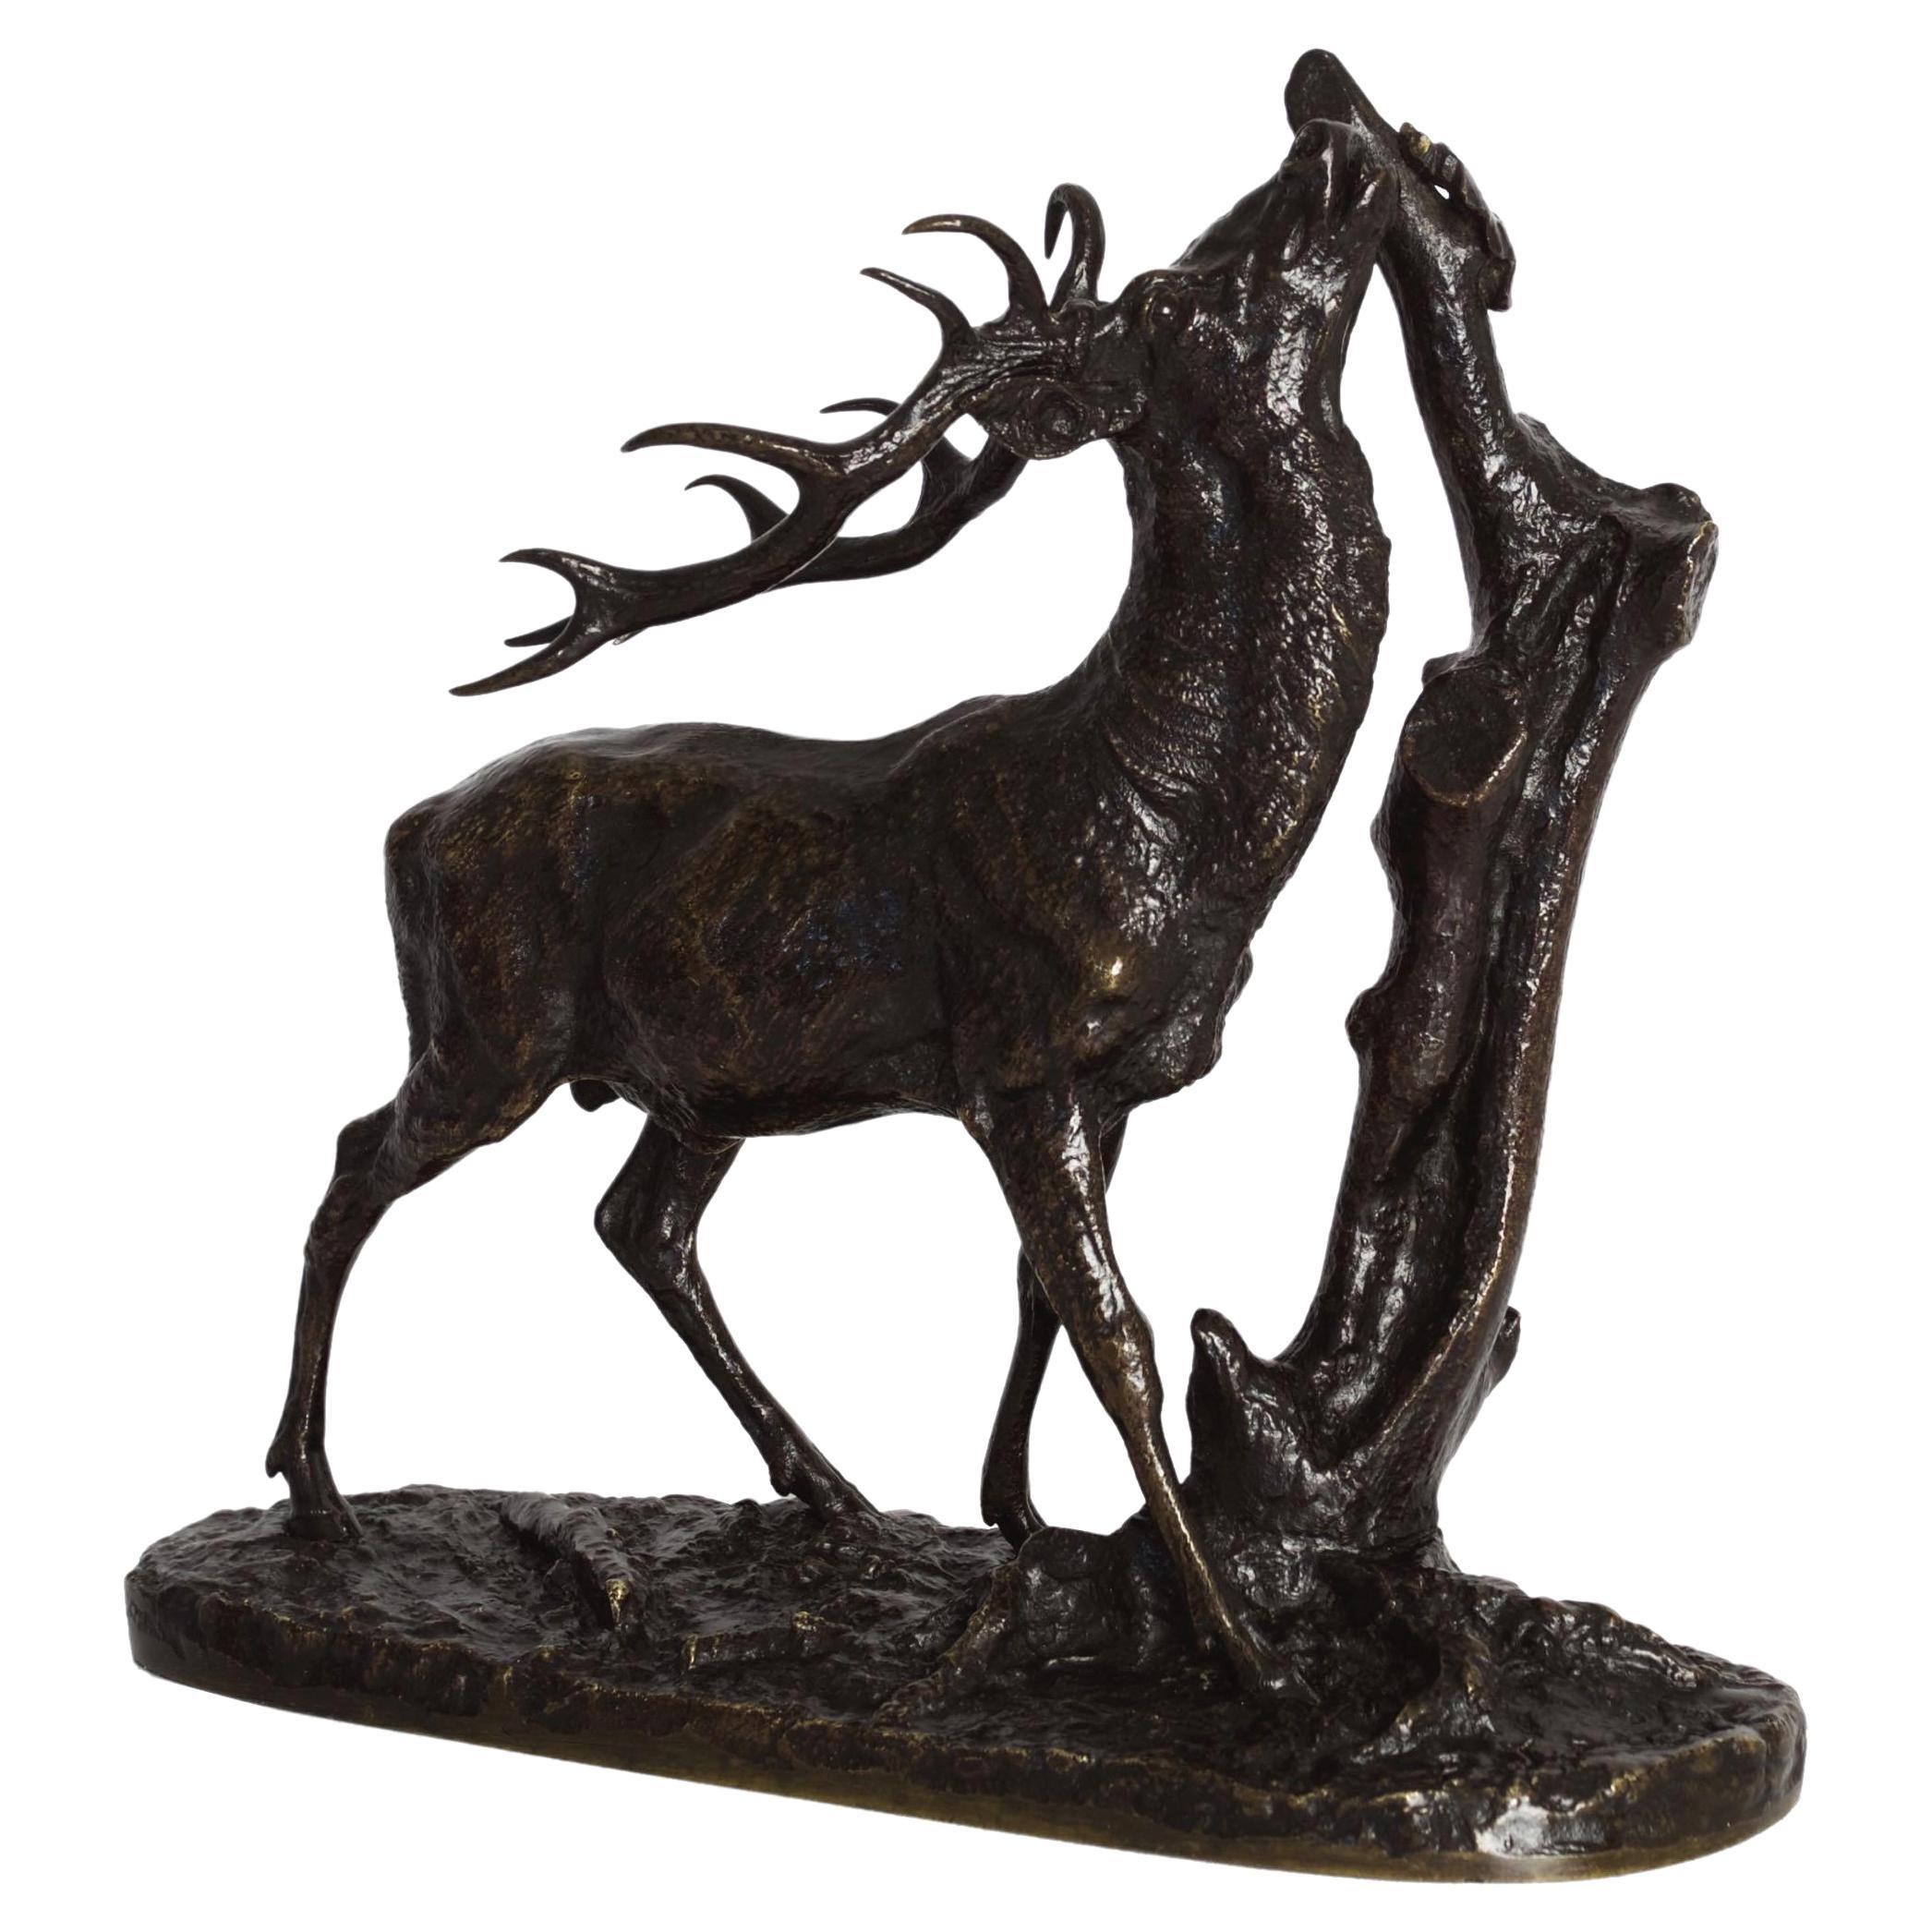 “Browsing Stag” 1843 Antique French Bronze Sculpture by Pierre Jules Mene For Sale